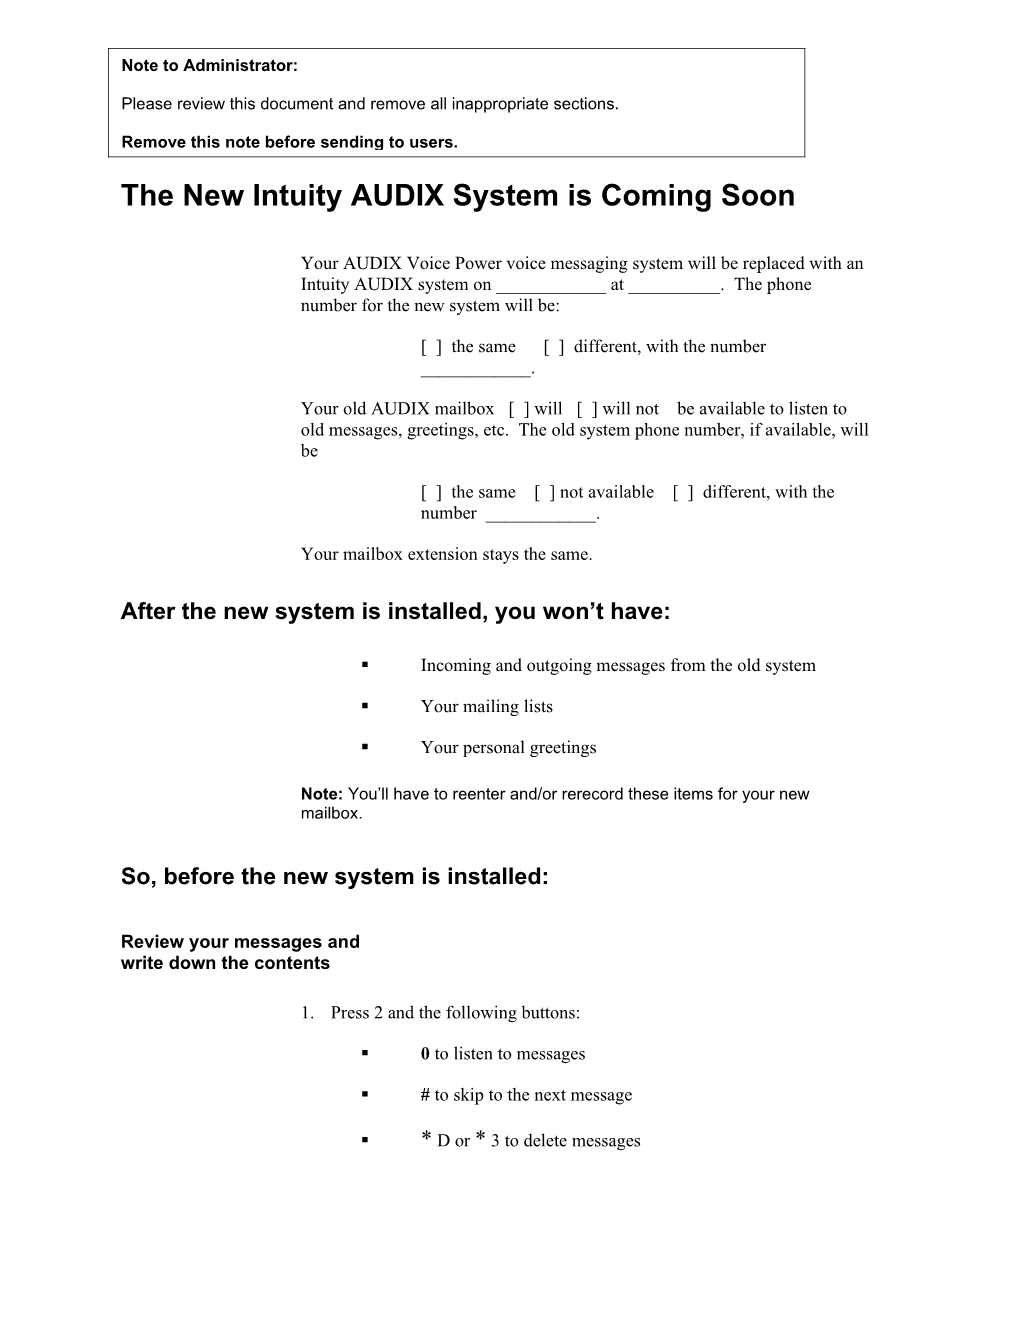 The New Intuity AUDIX System Is Coming Soon